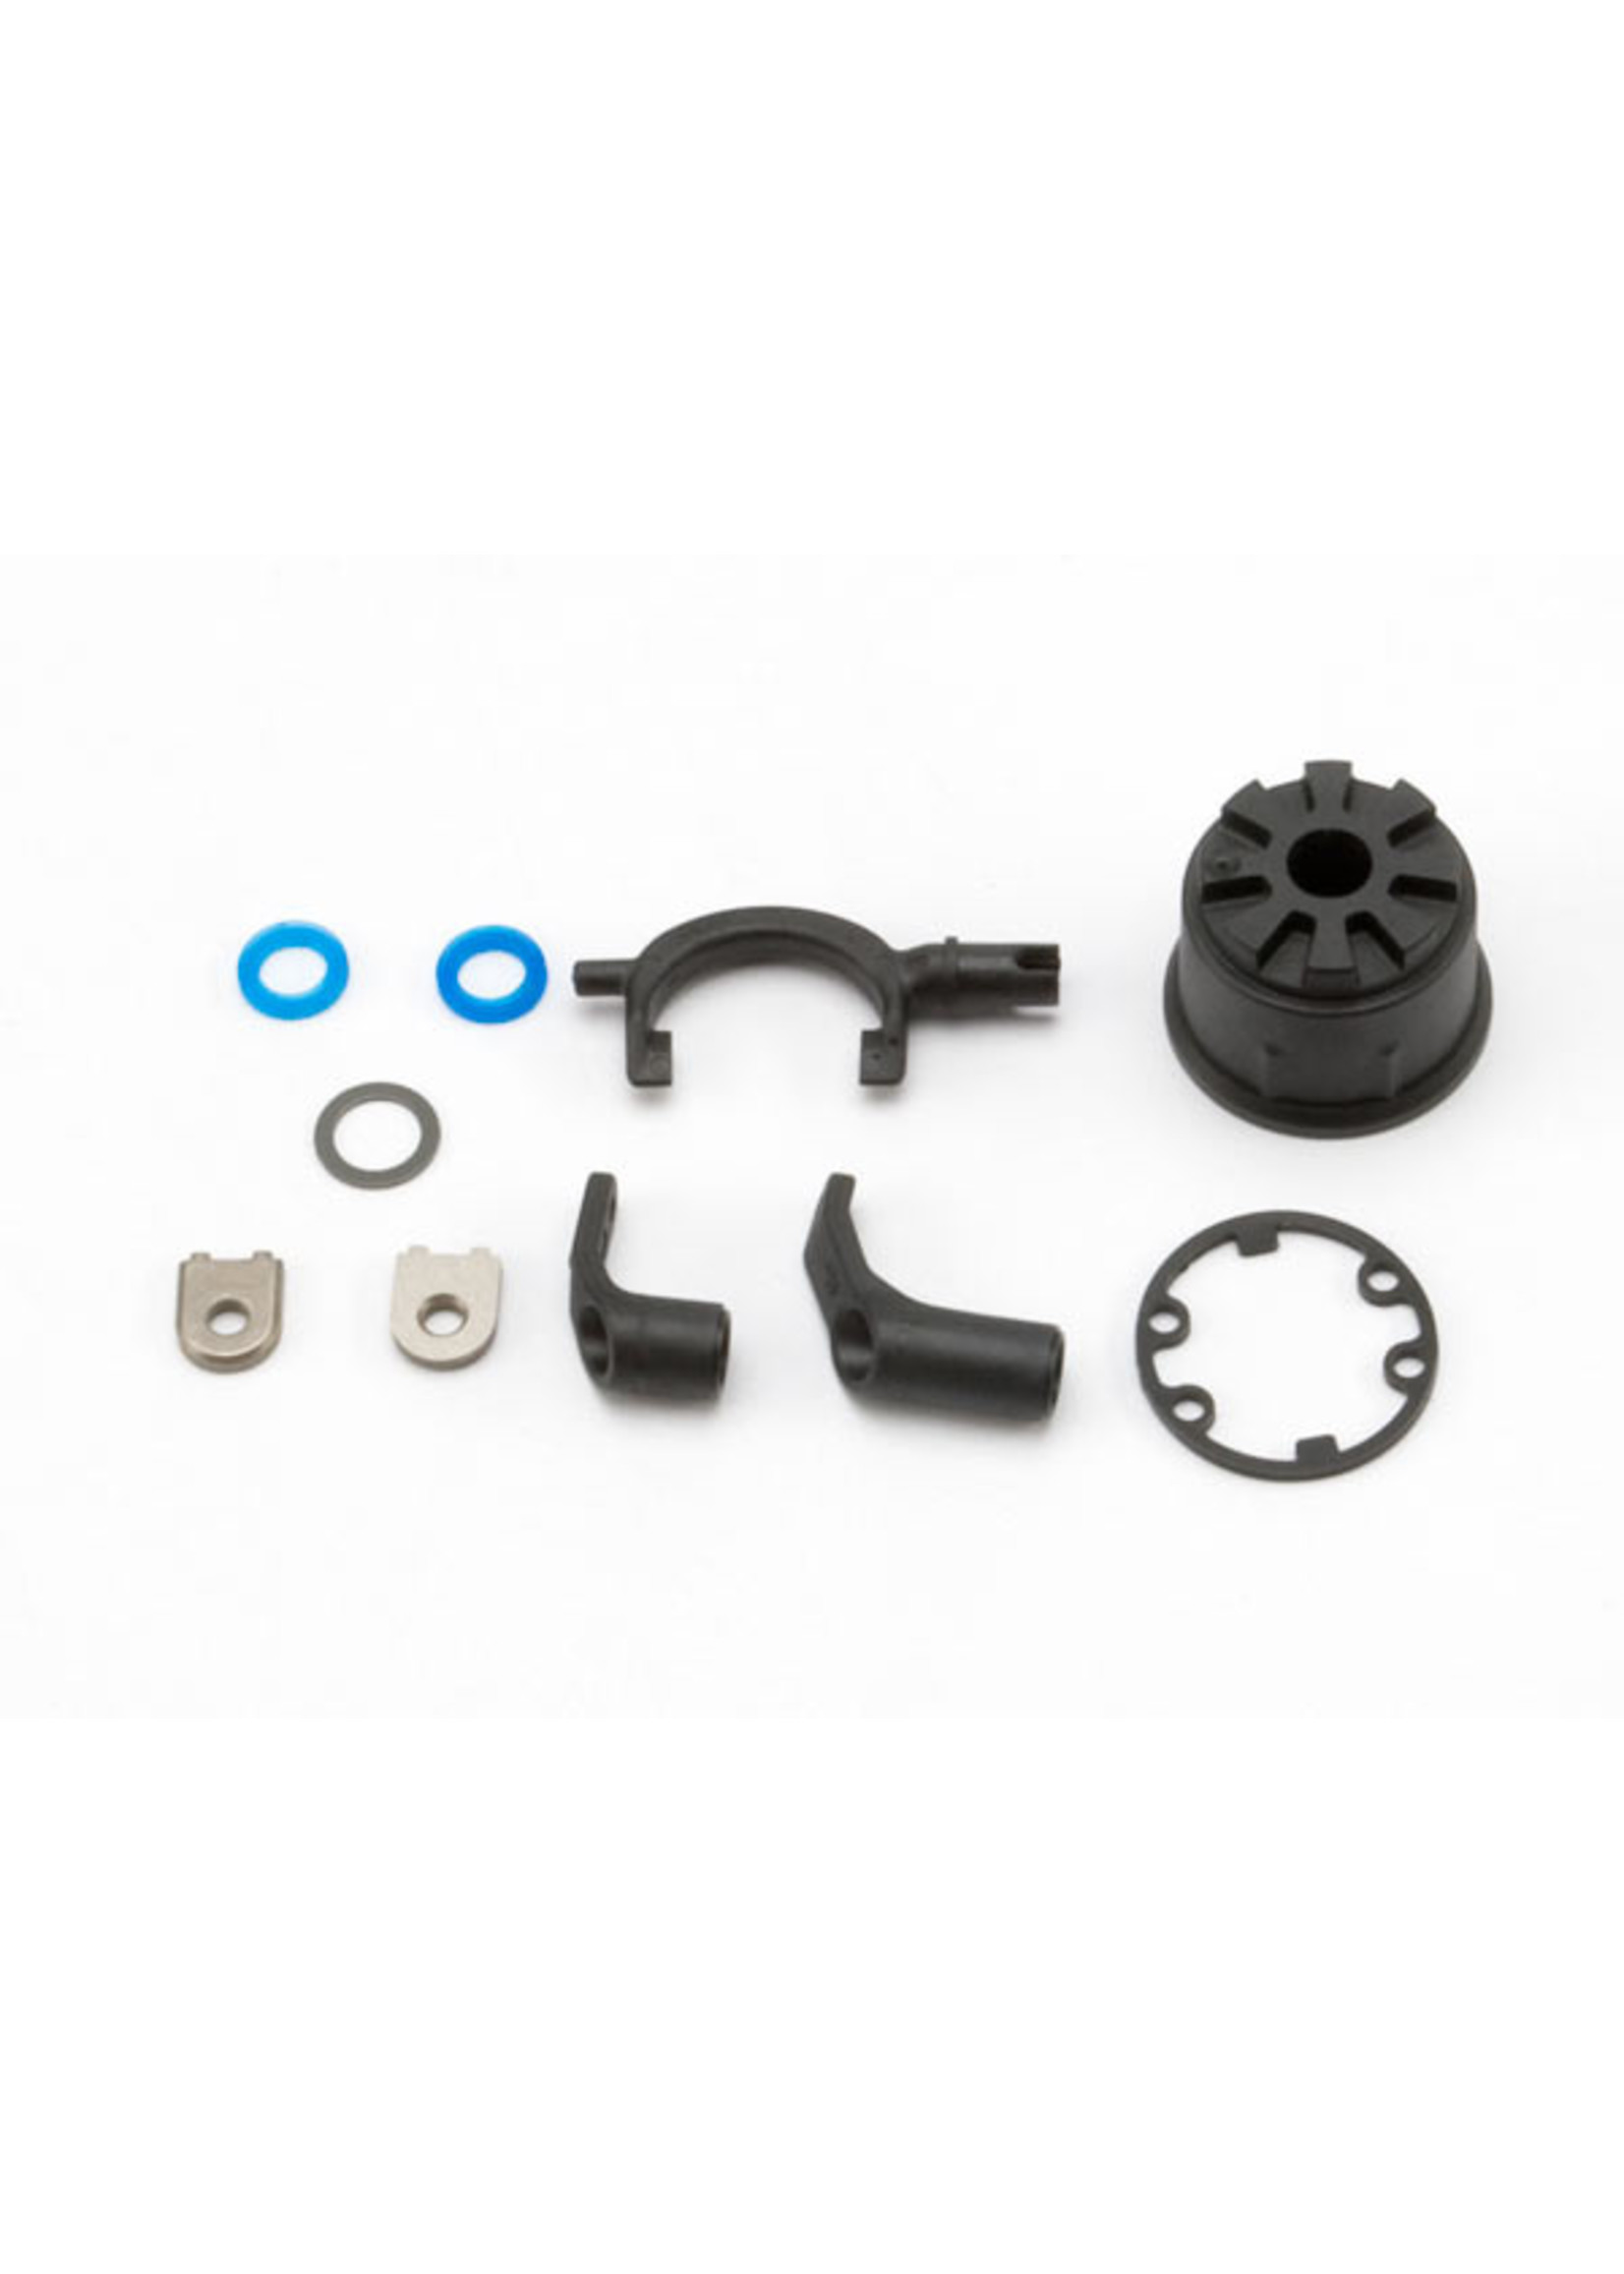 Traxxas 5681 - Carrier Differential - Heavy Duty